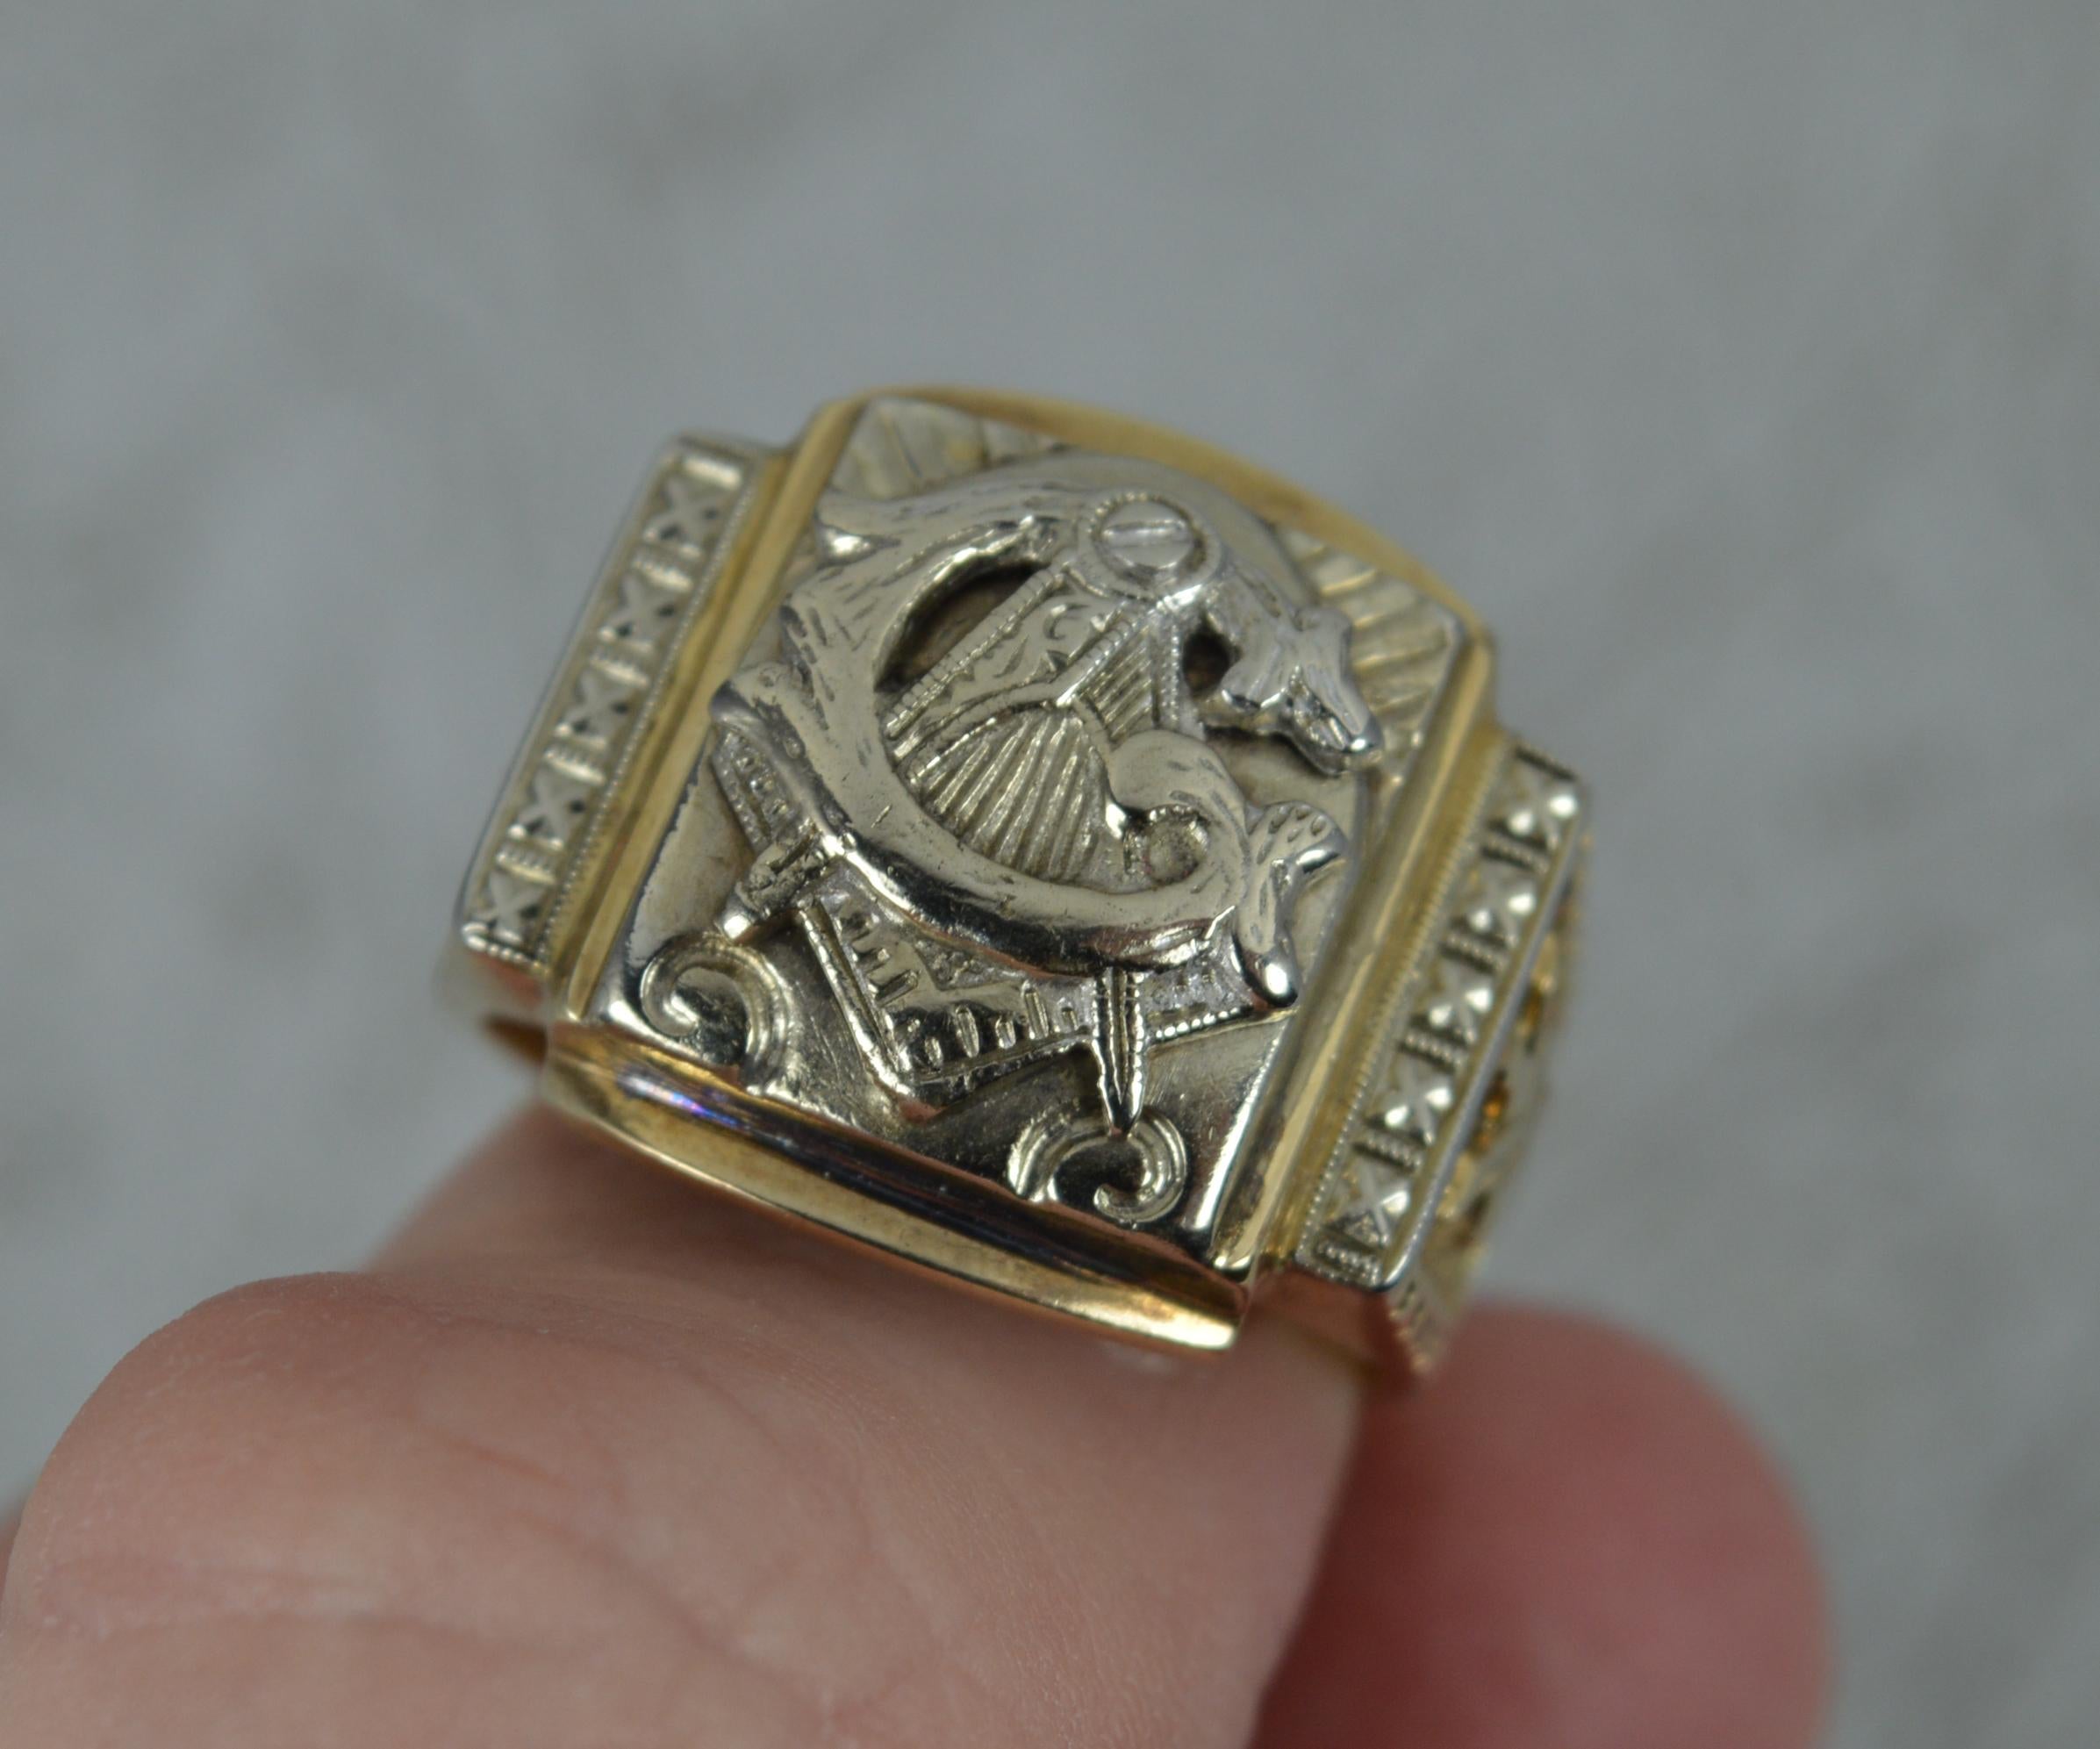 A Masonic signet ring.
Solid 10 carat gold example. Yellow gold shank and white gold head setting.
Designed with the Masonic emblem to centre with initial G entwined.
14mm x 17mm main central section.

Condition ; Good for age. Clean band. Light